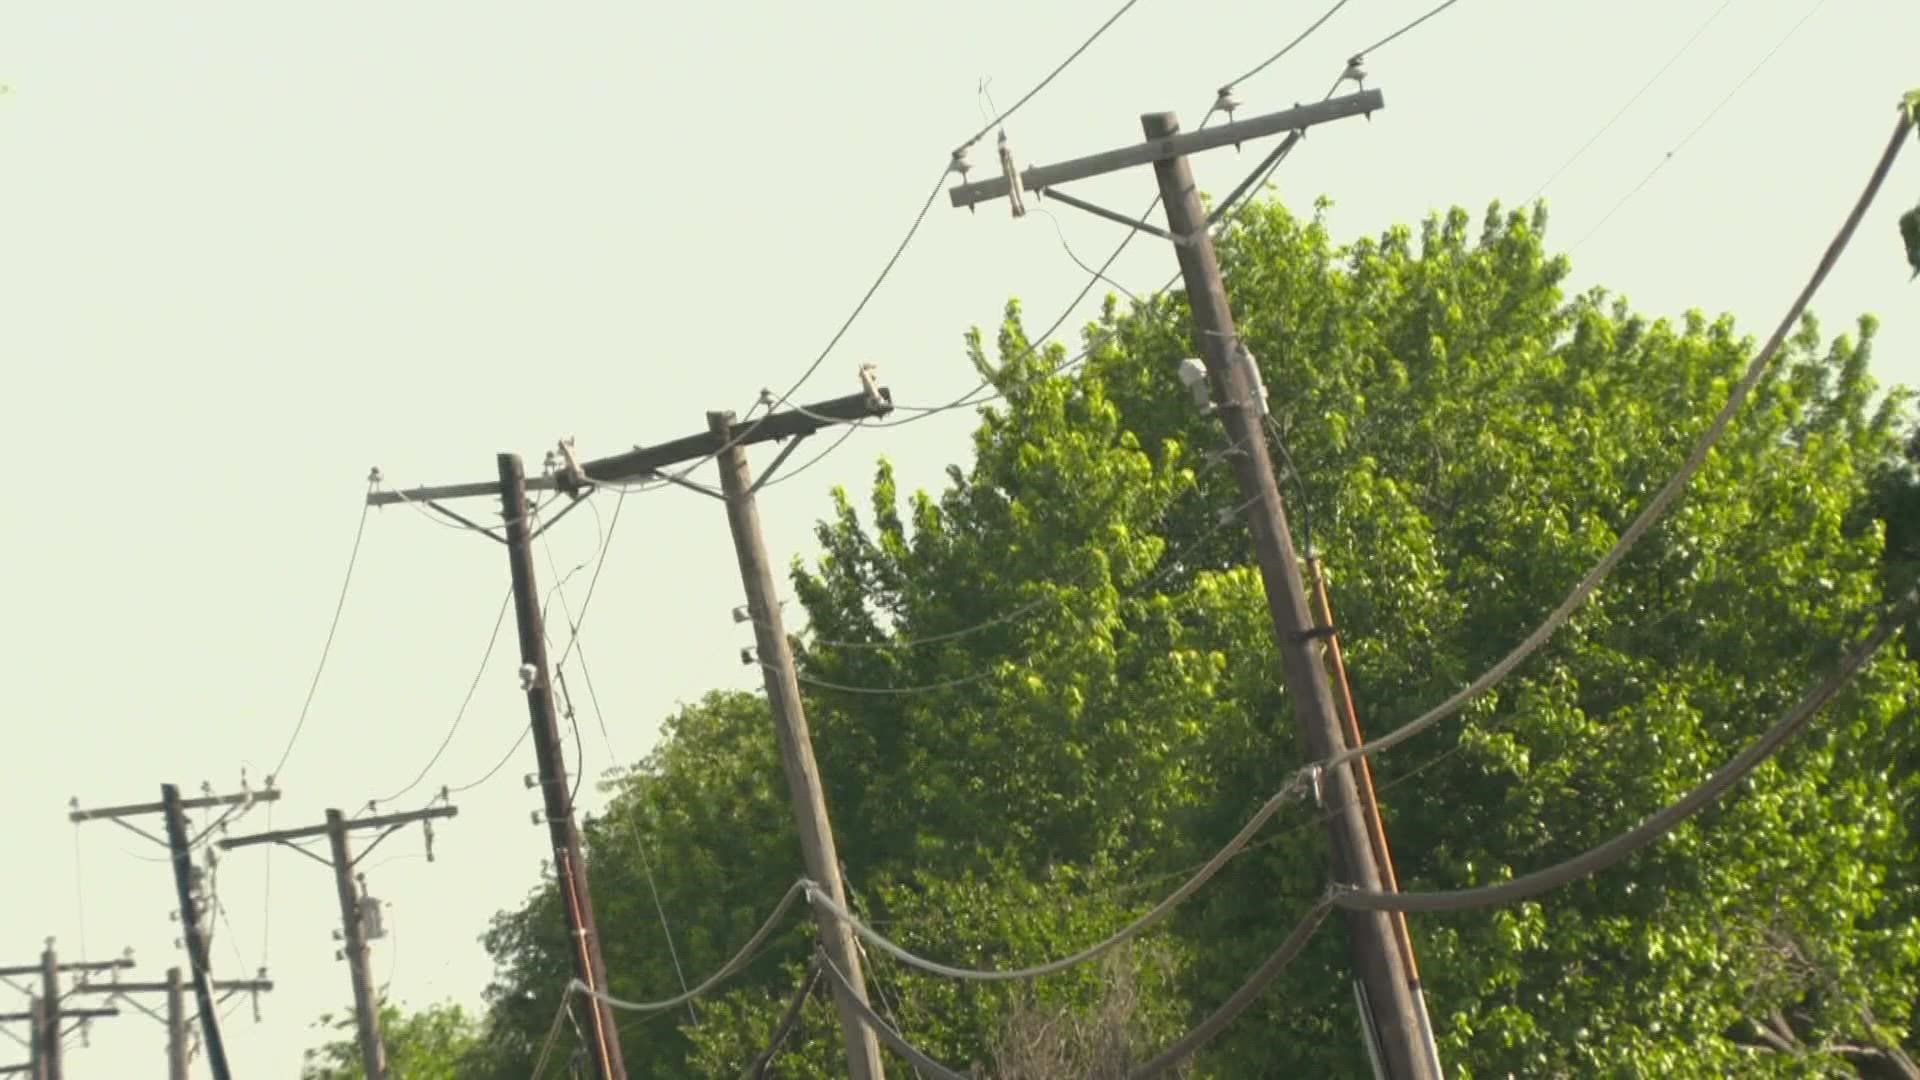 Oncor hopes to replace ten leaning poles in the Custer and Parker area over the next several weeks.